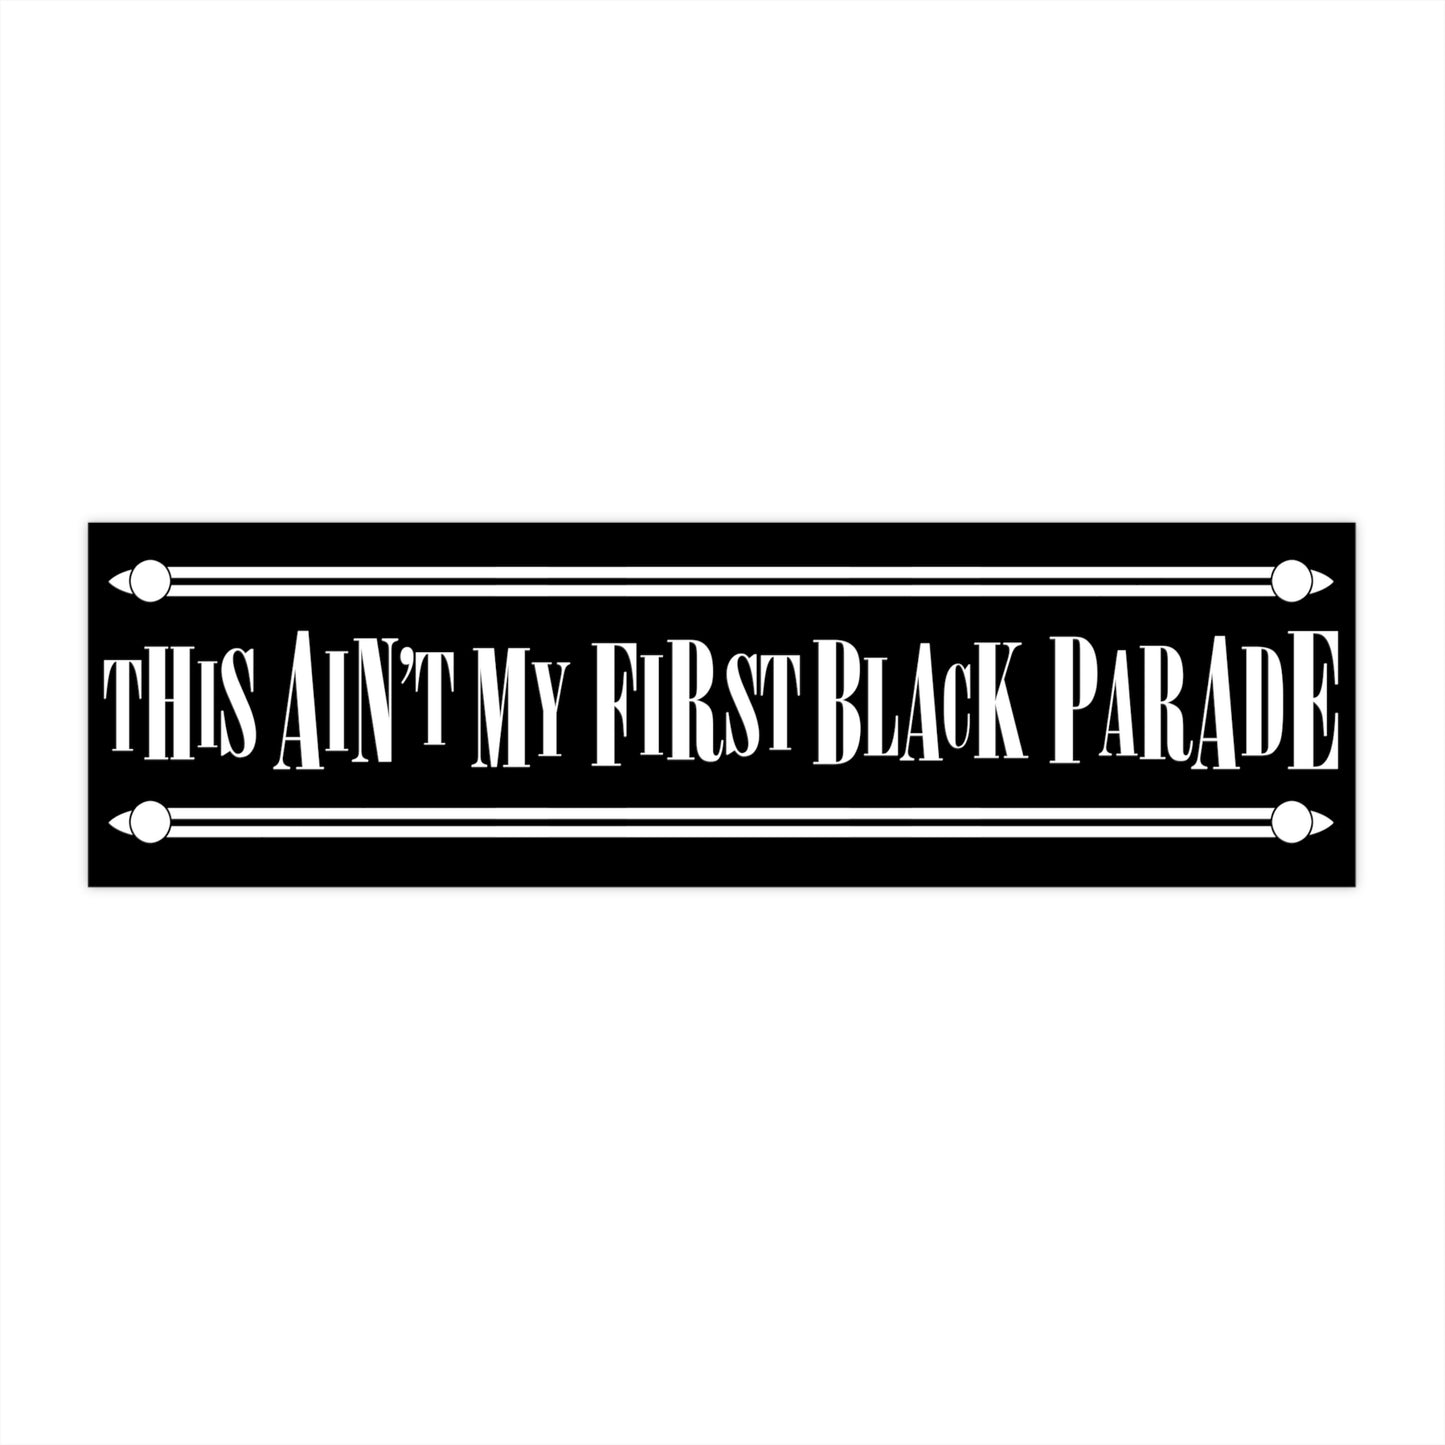 This Ain't My First Black Parade bumper sticker